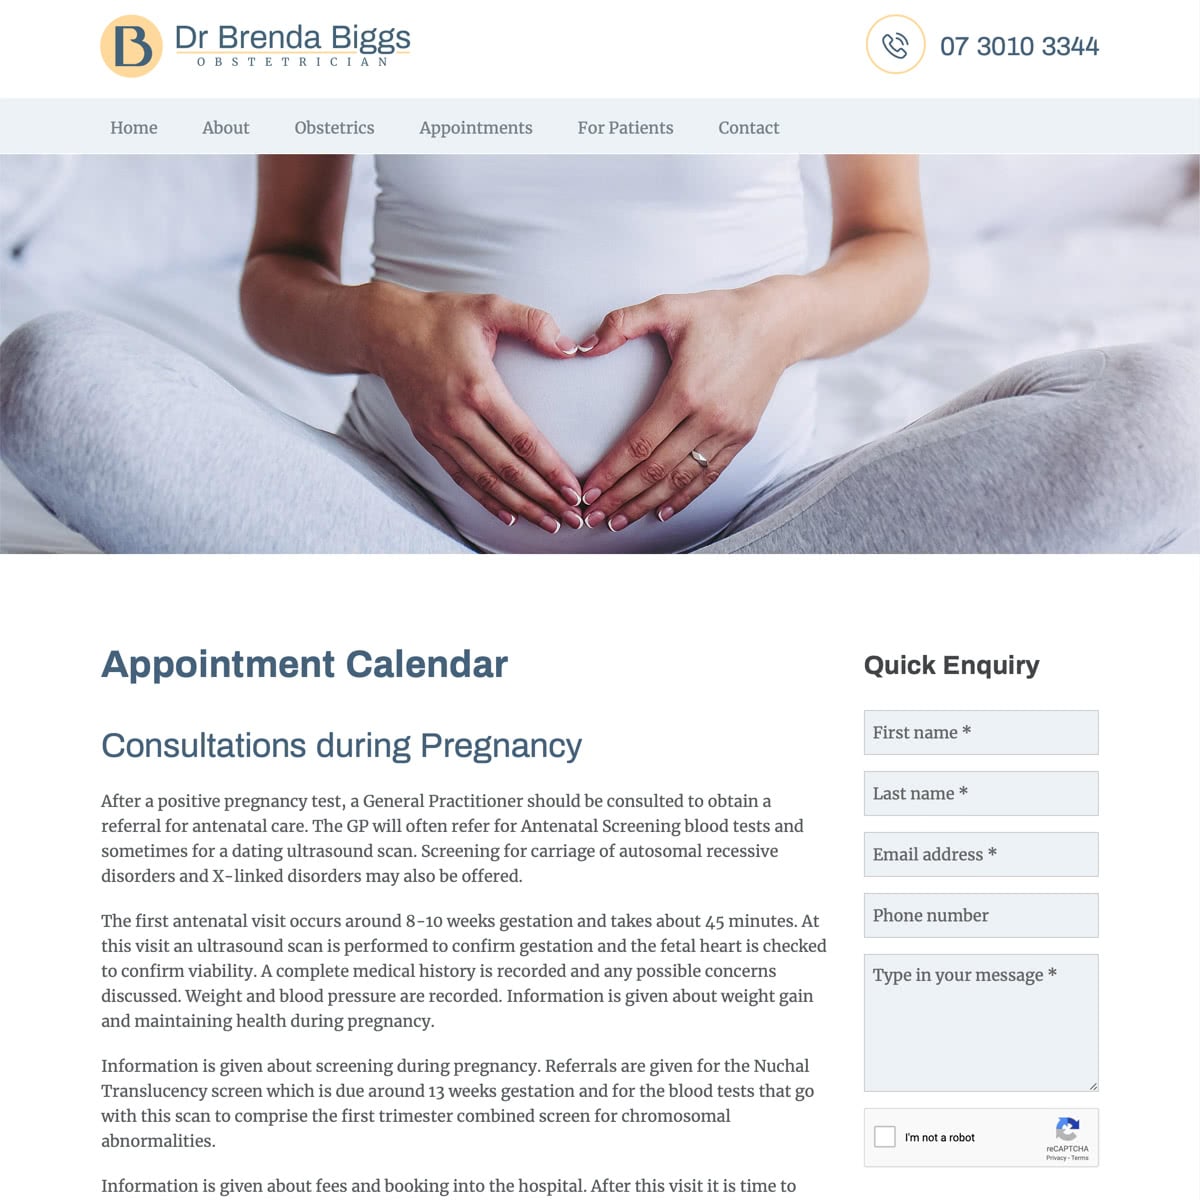 Dr Brenda Biggs - Appointments